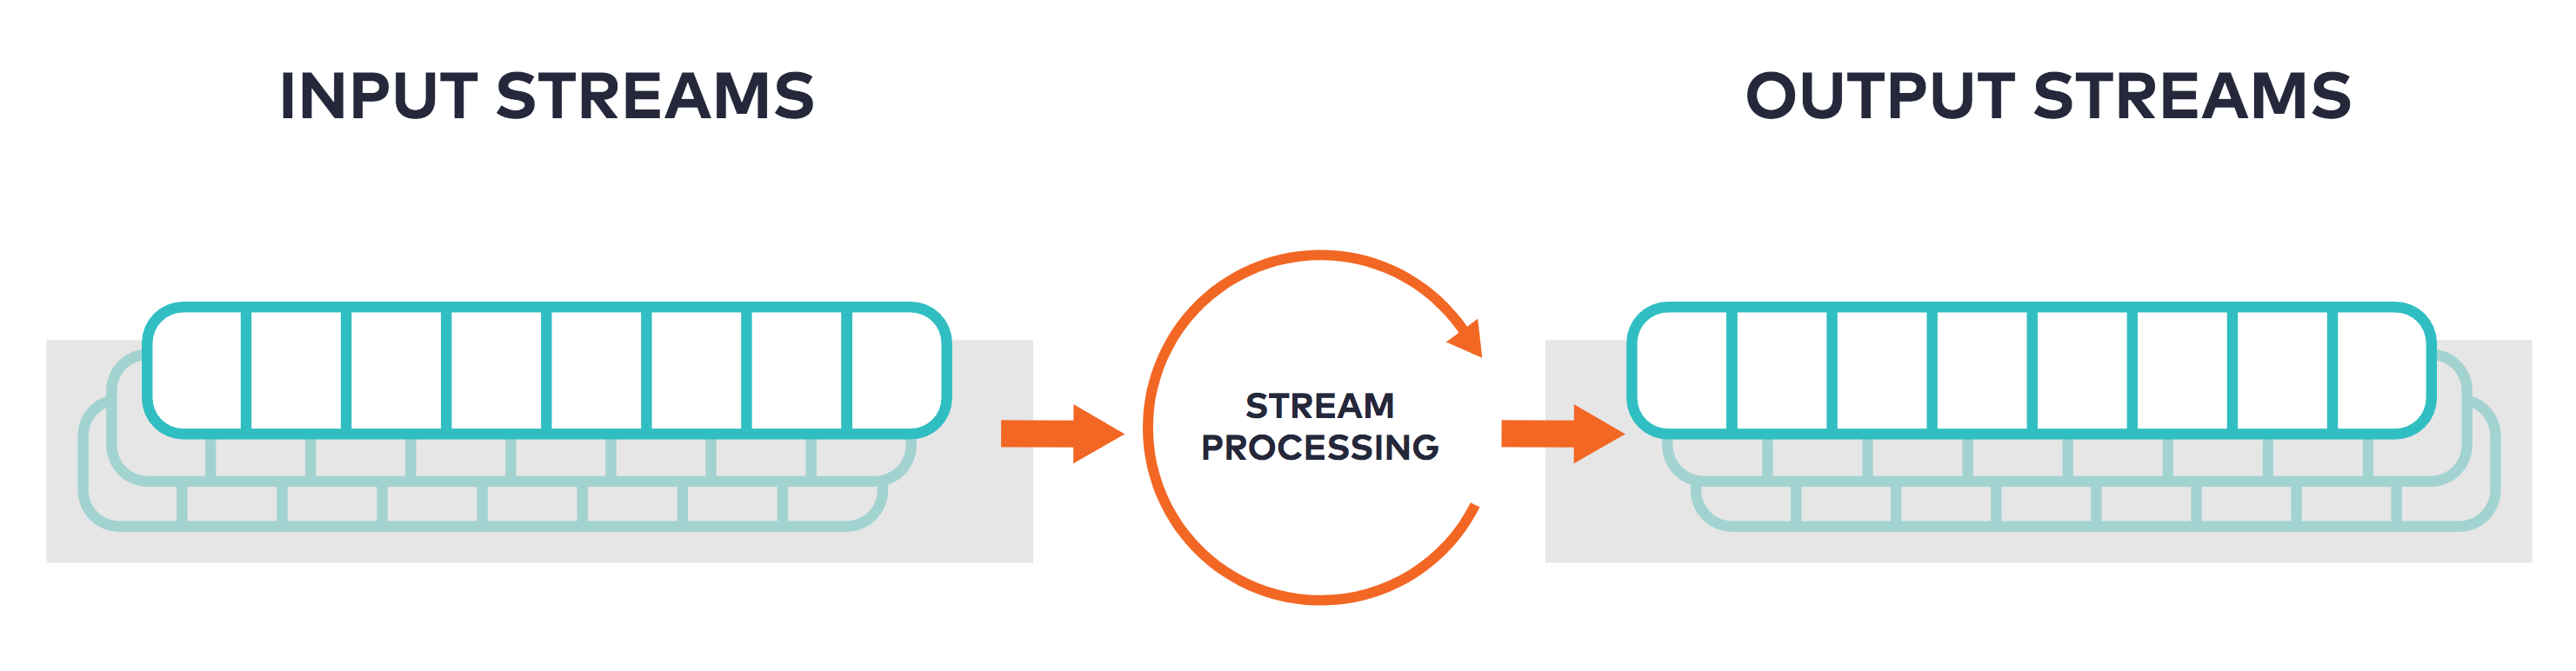 Illustration of stream processing, showing input and output streams